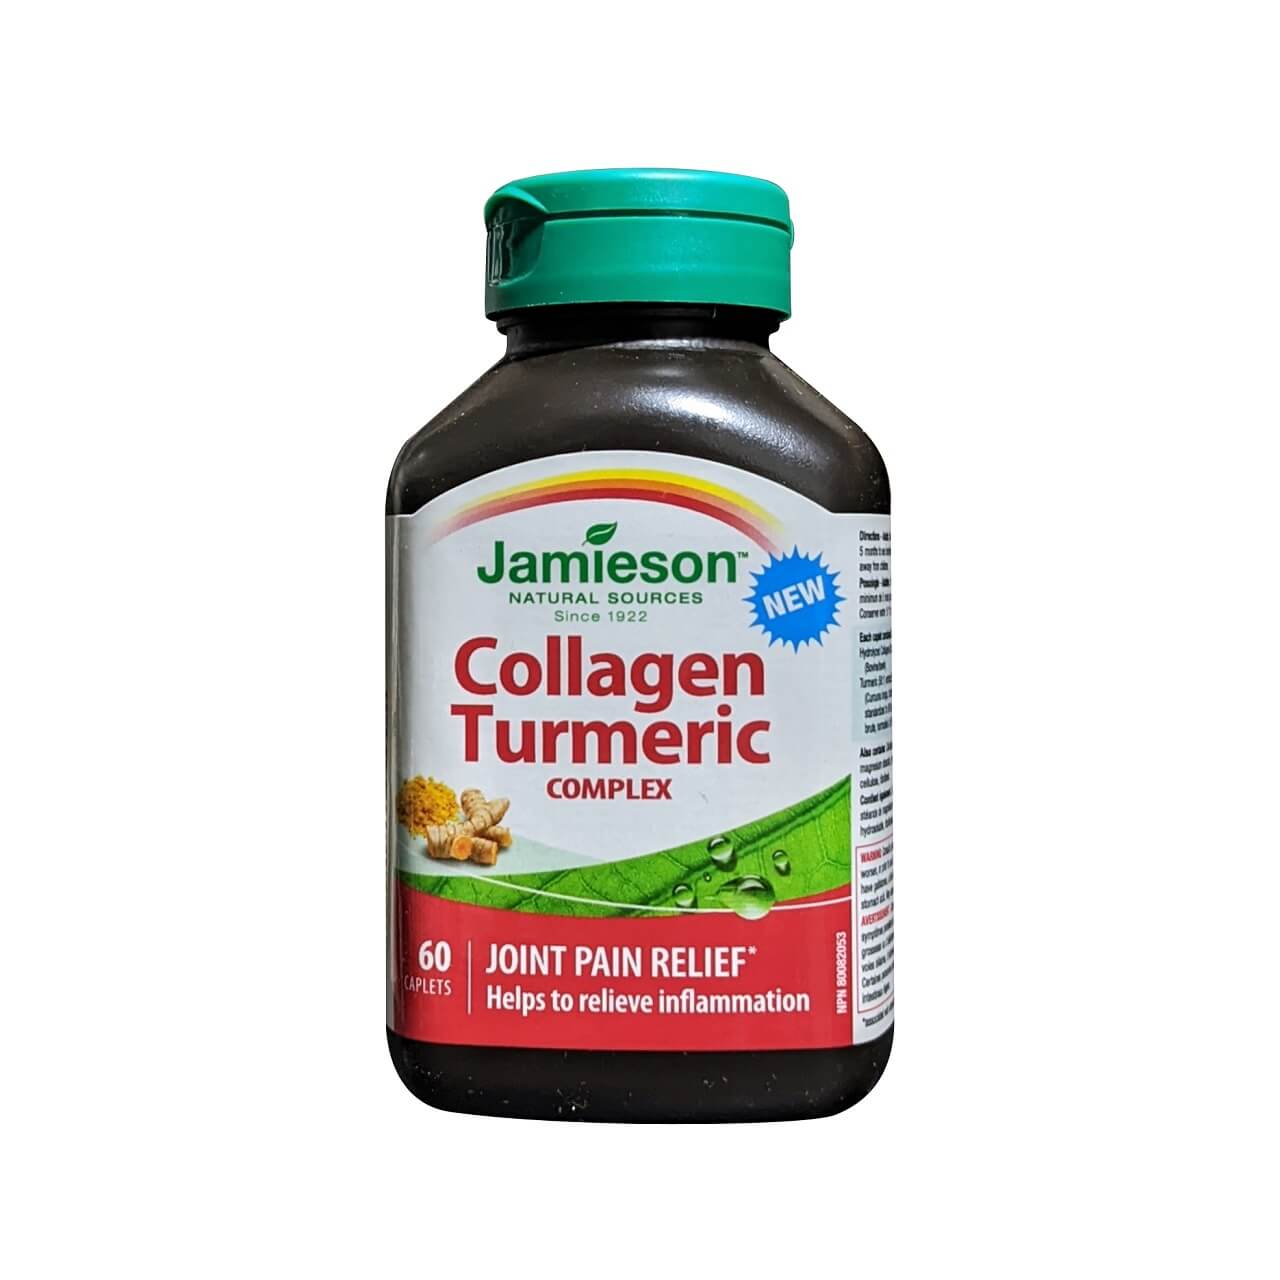 Product label for Jamieson Collagen Turmeric Complex (60 caplets) in English